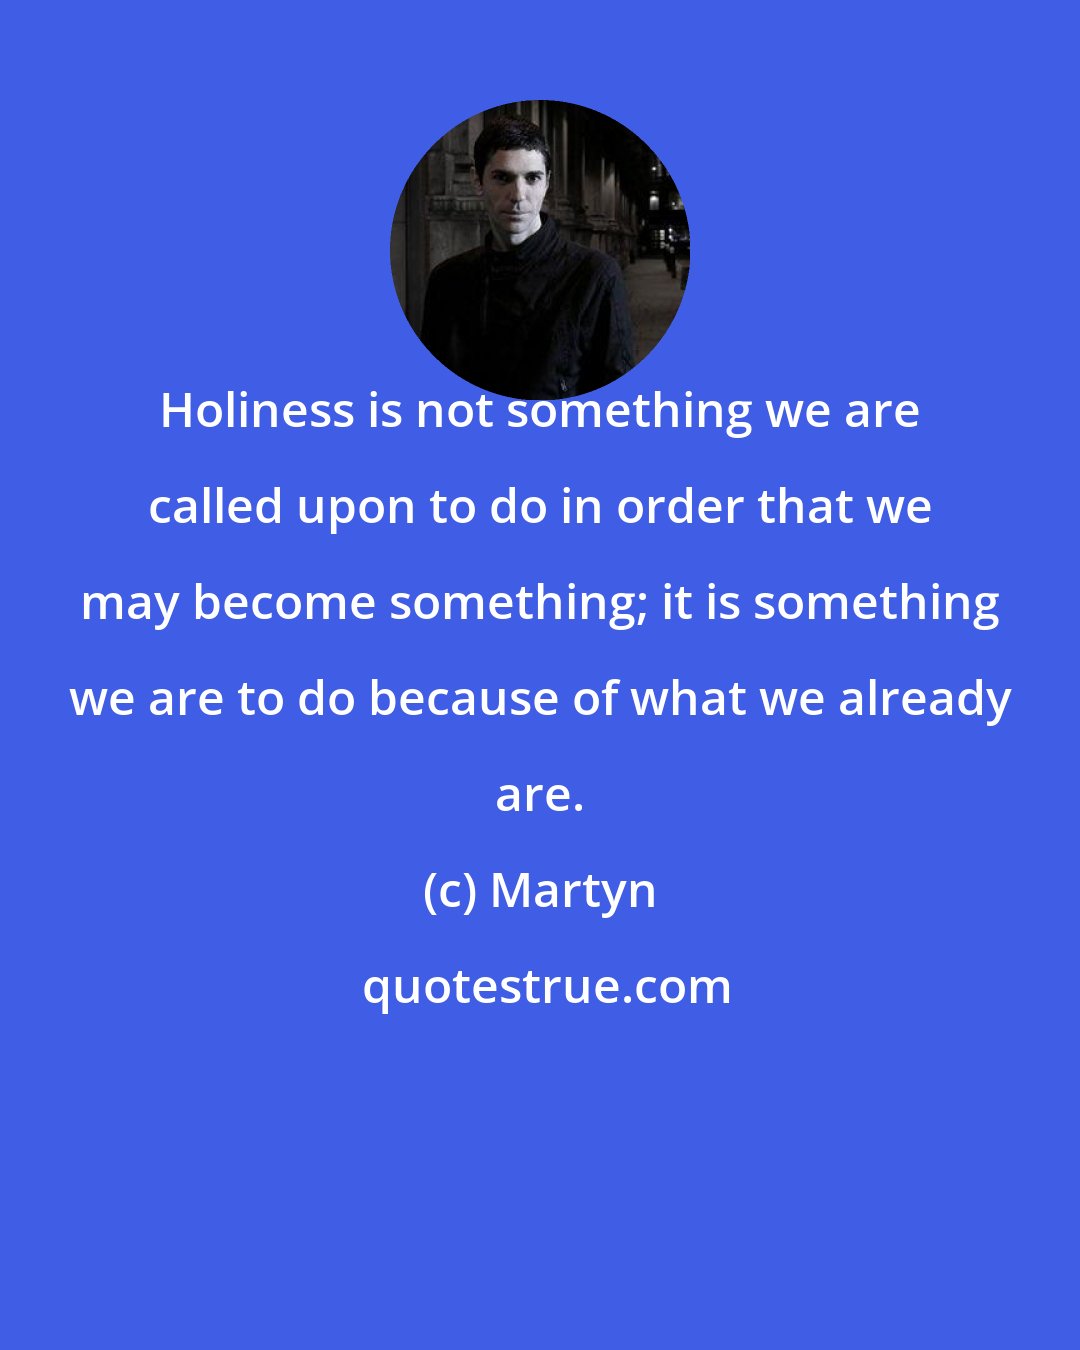 Martyn: Holiness is not something we are called upon to do in order that we may become something; it is something we are to do because of what we already are.